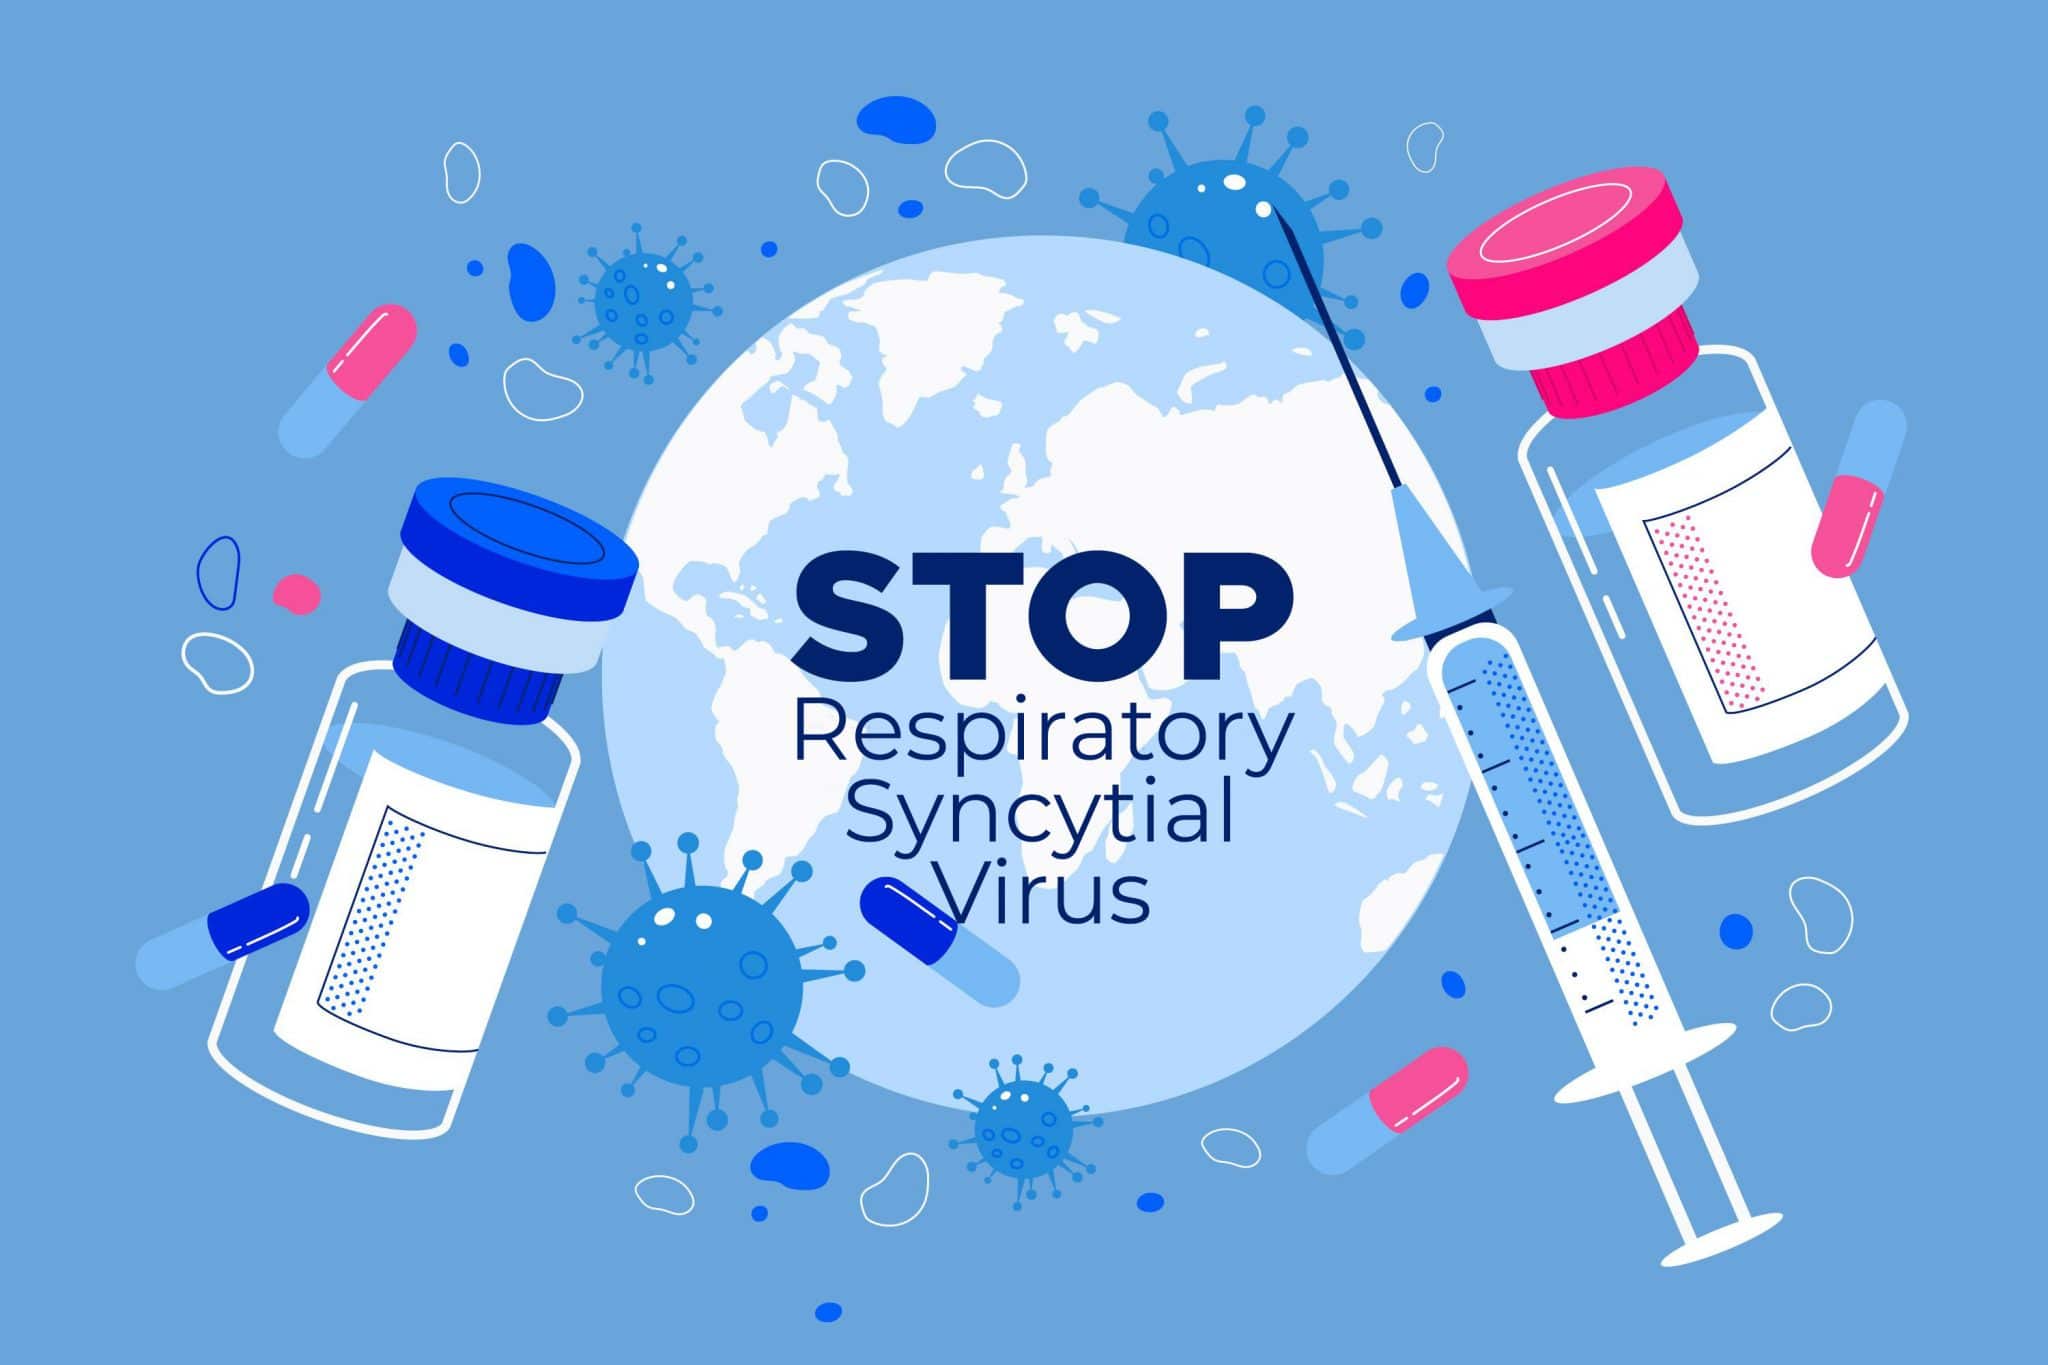 Stop Respiratory Syncytial Virus